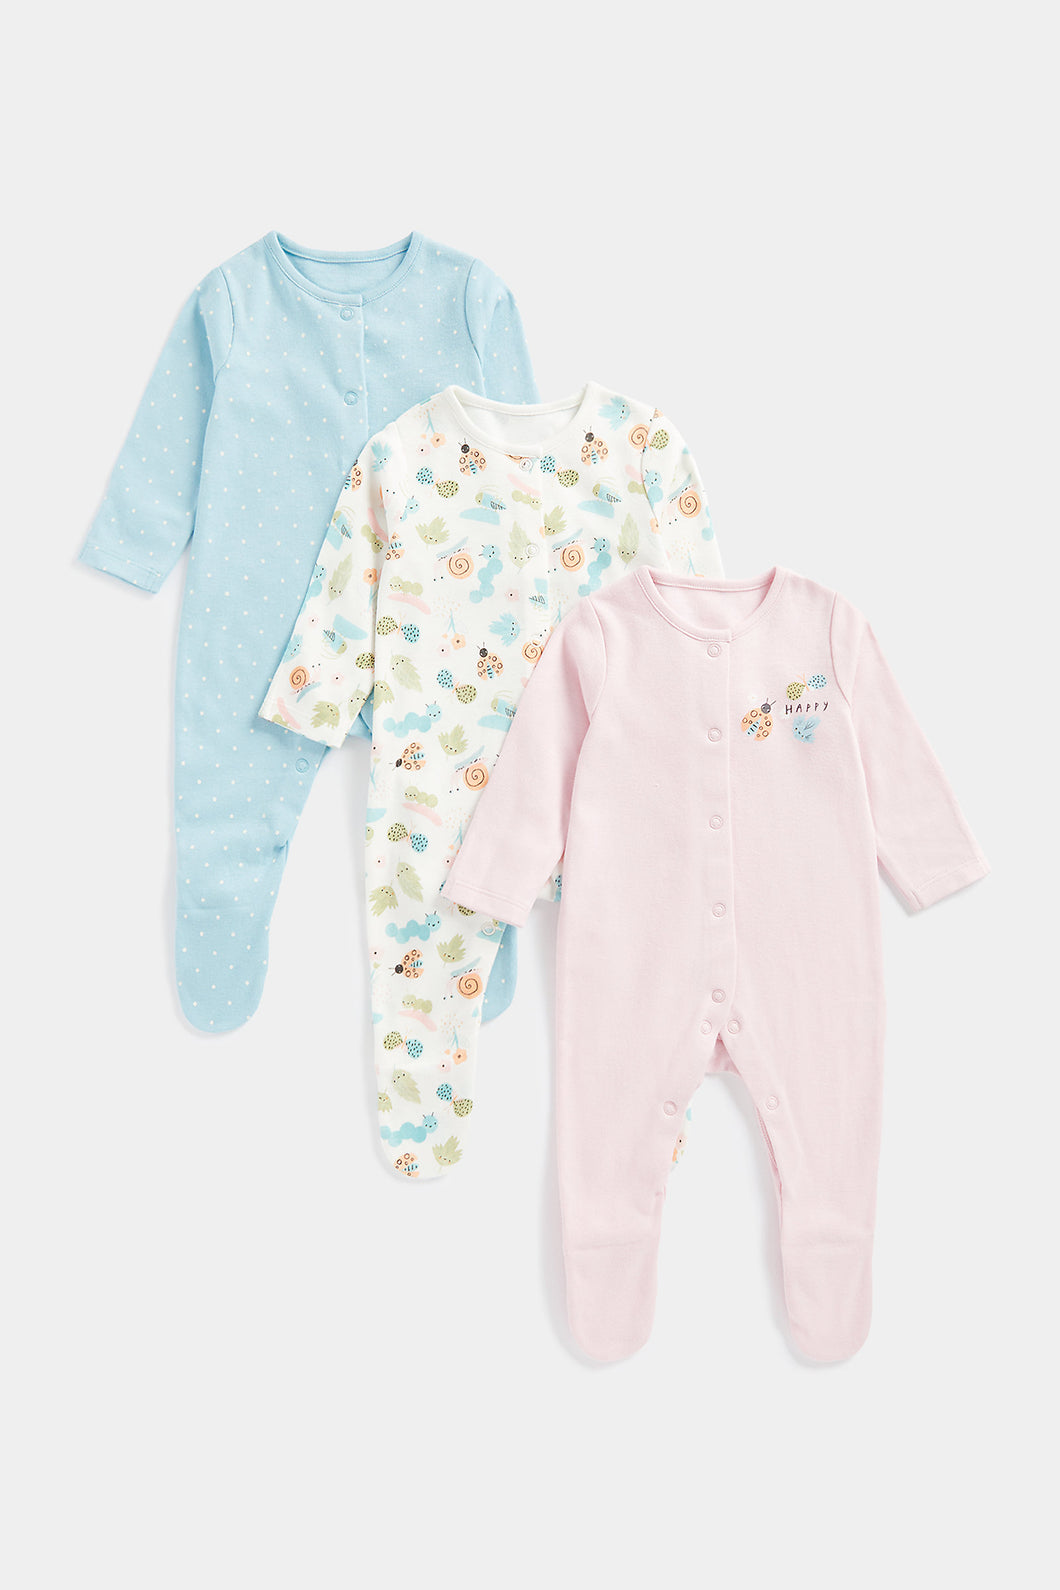 Mothercare In the Garden Sleepsuits - 3 Pack